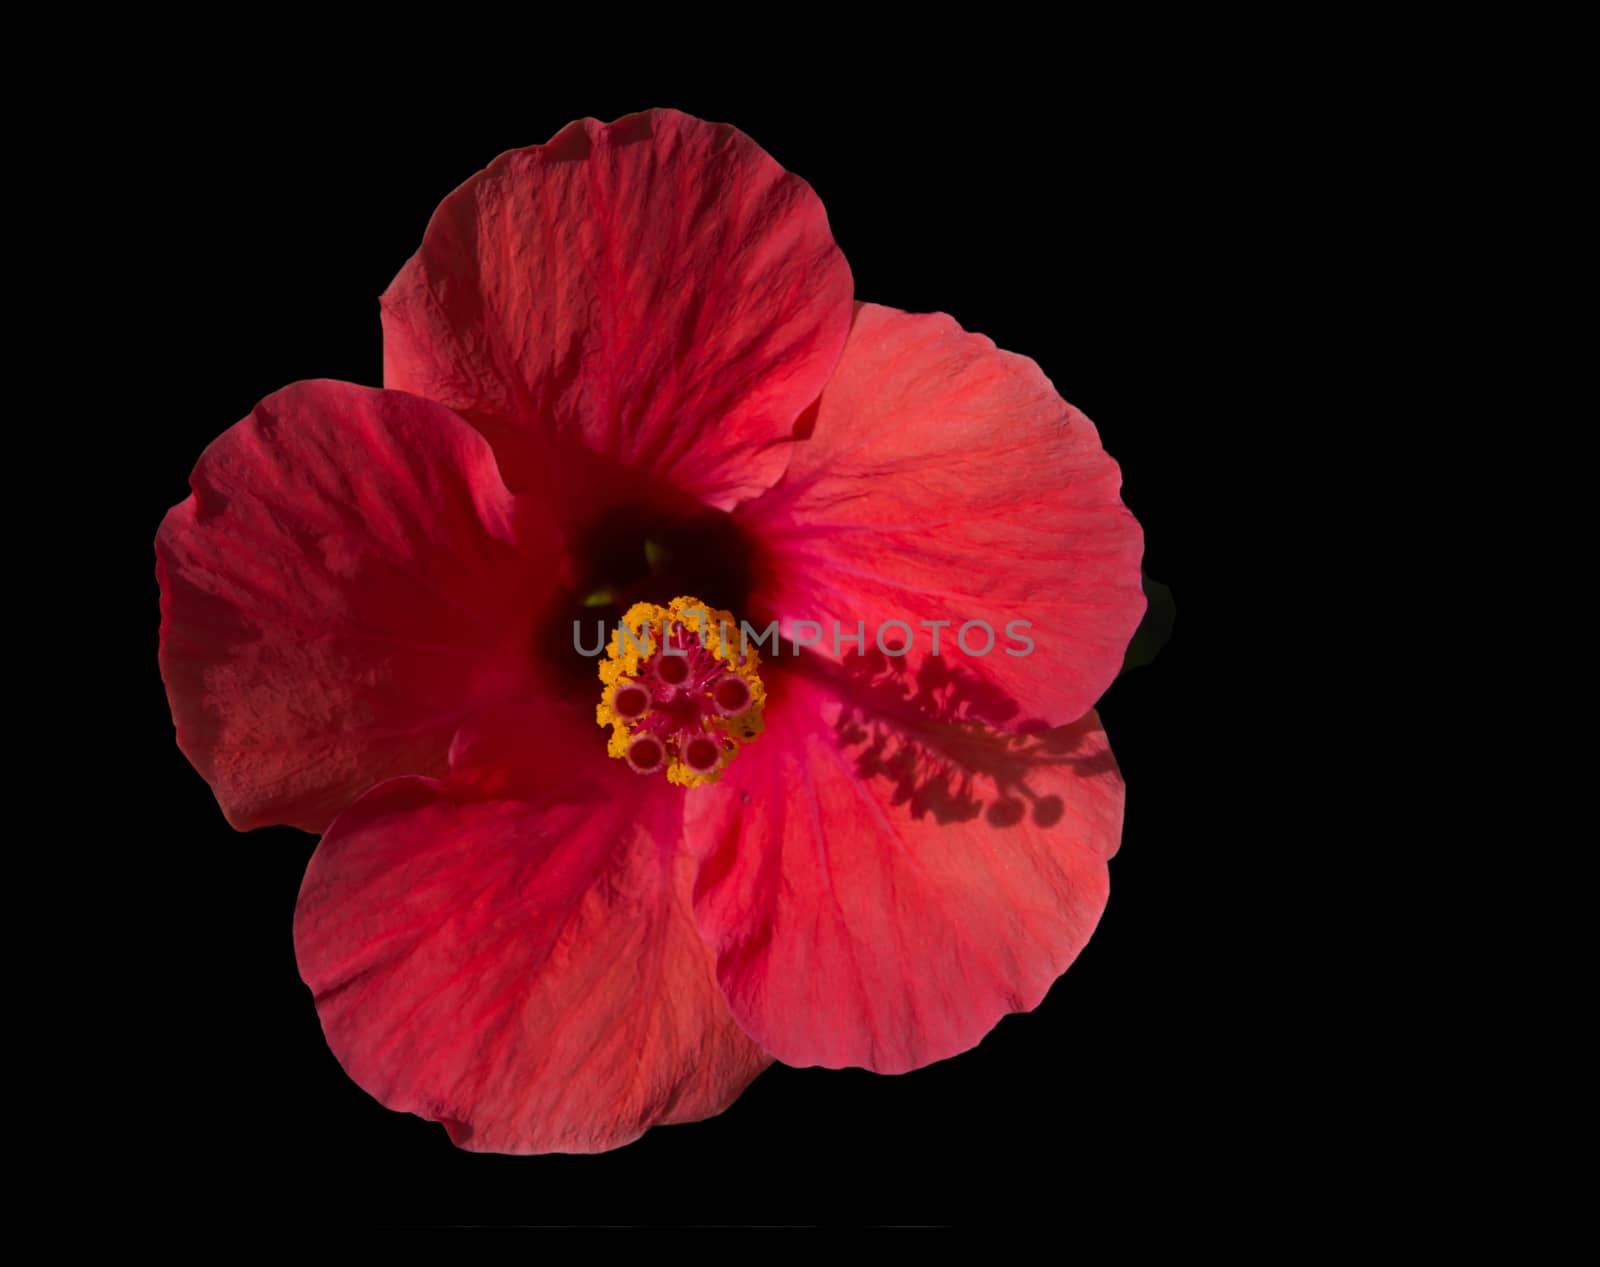 Red Hibiscus flower frontal view isolated on black.